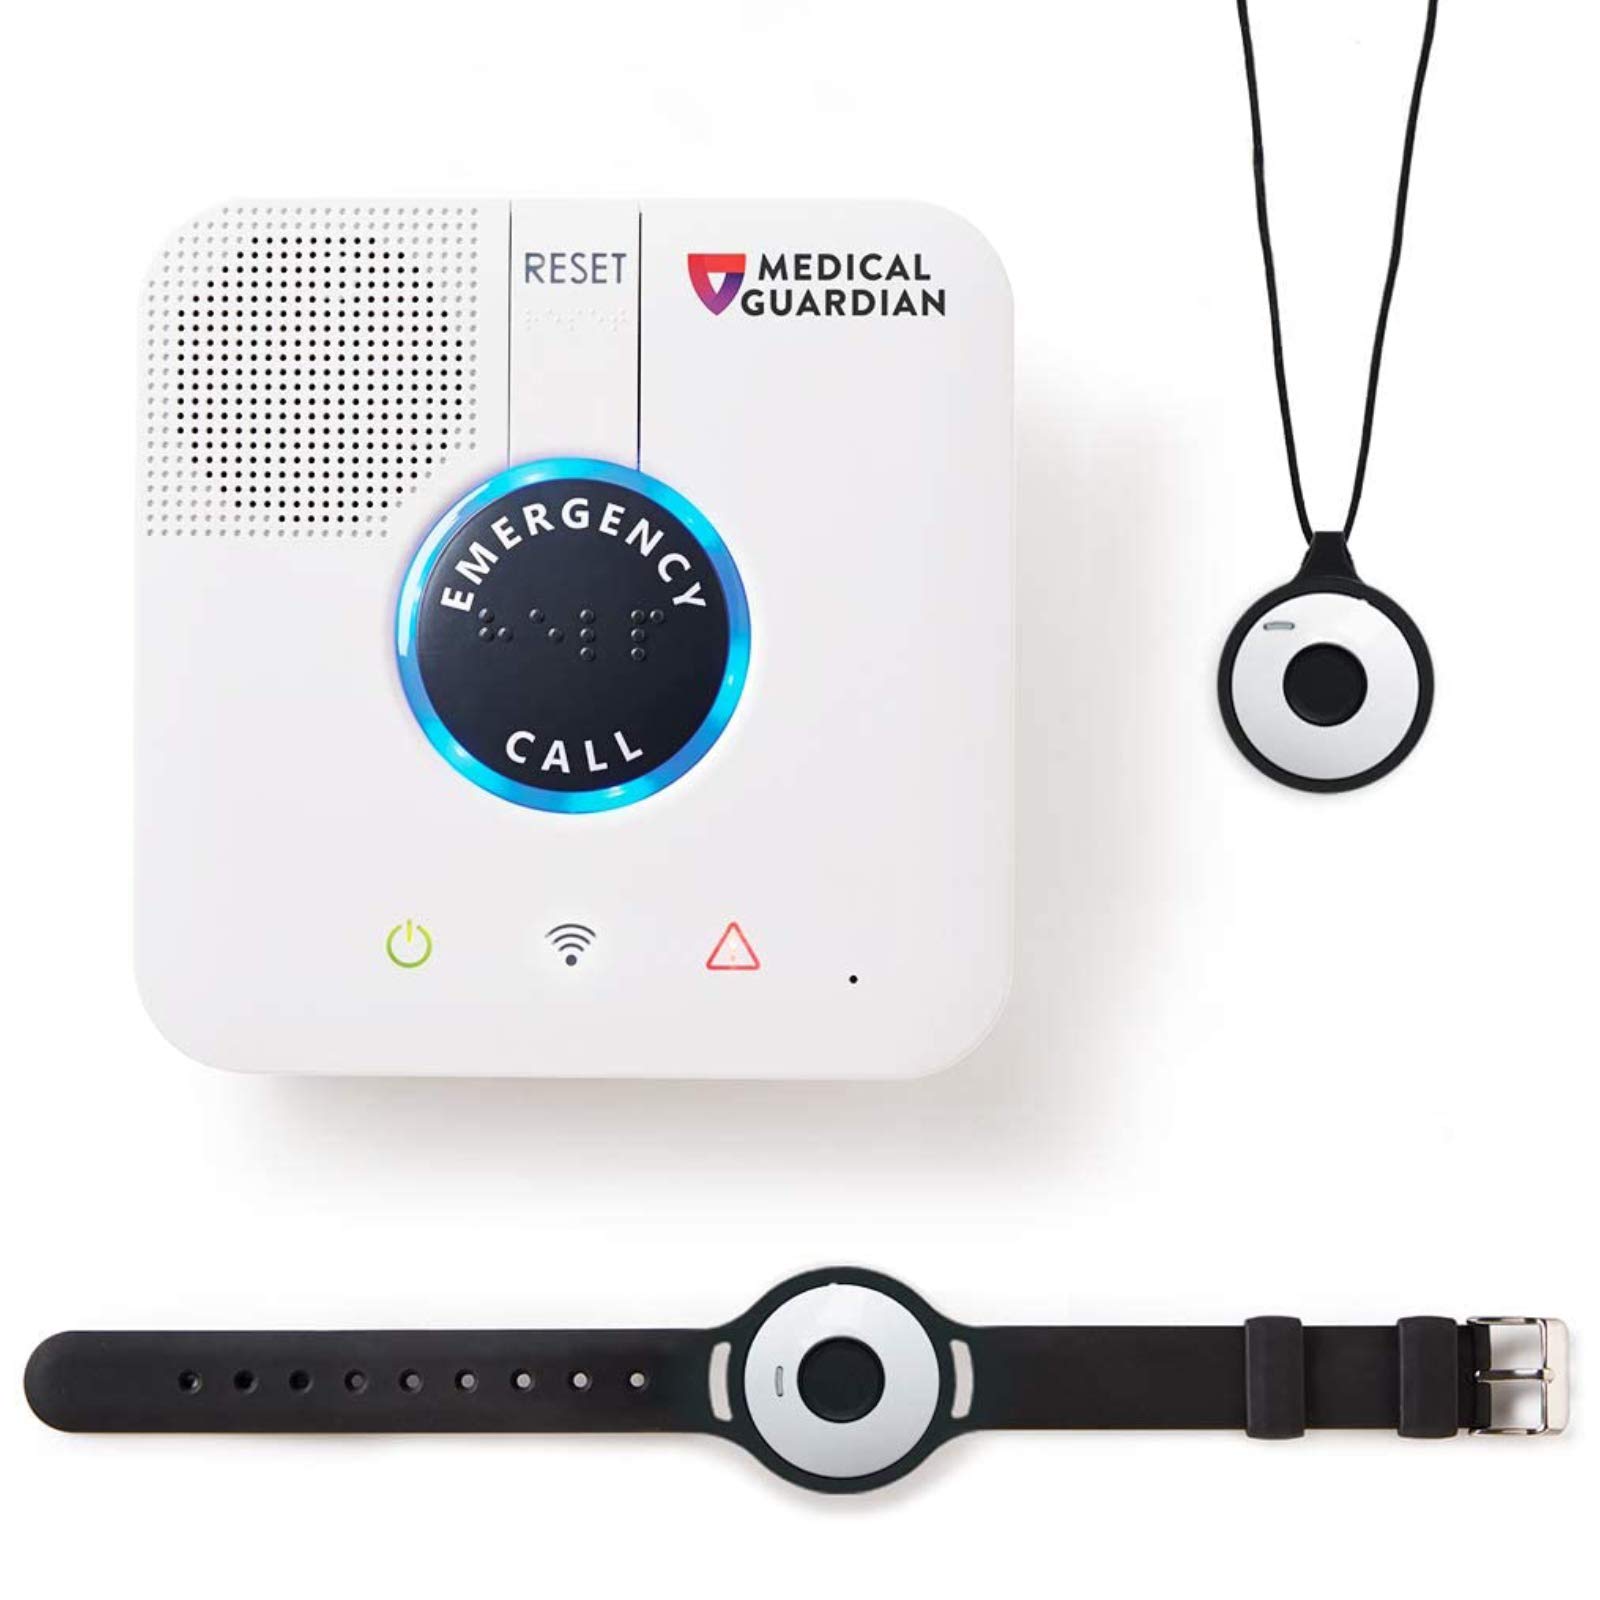 In-Home Medical Alert System for Seniors - Gain Safety & Independence